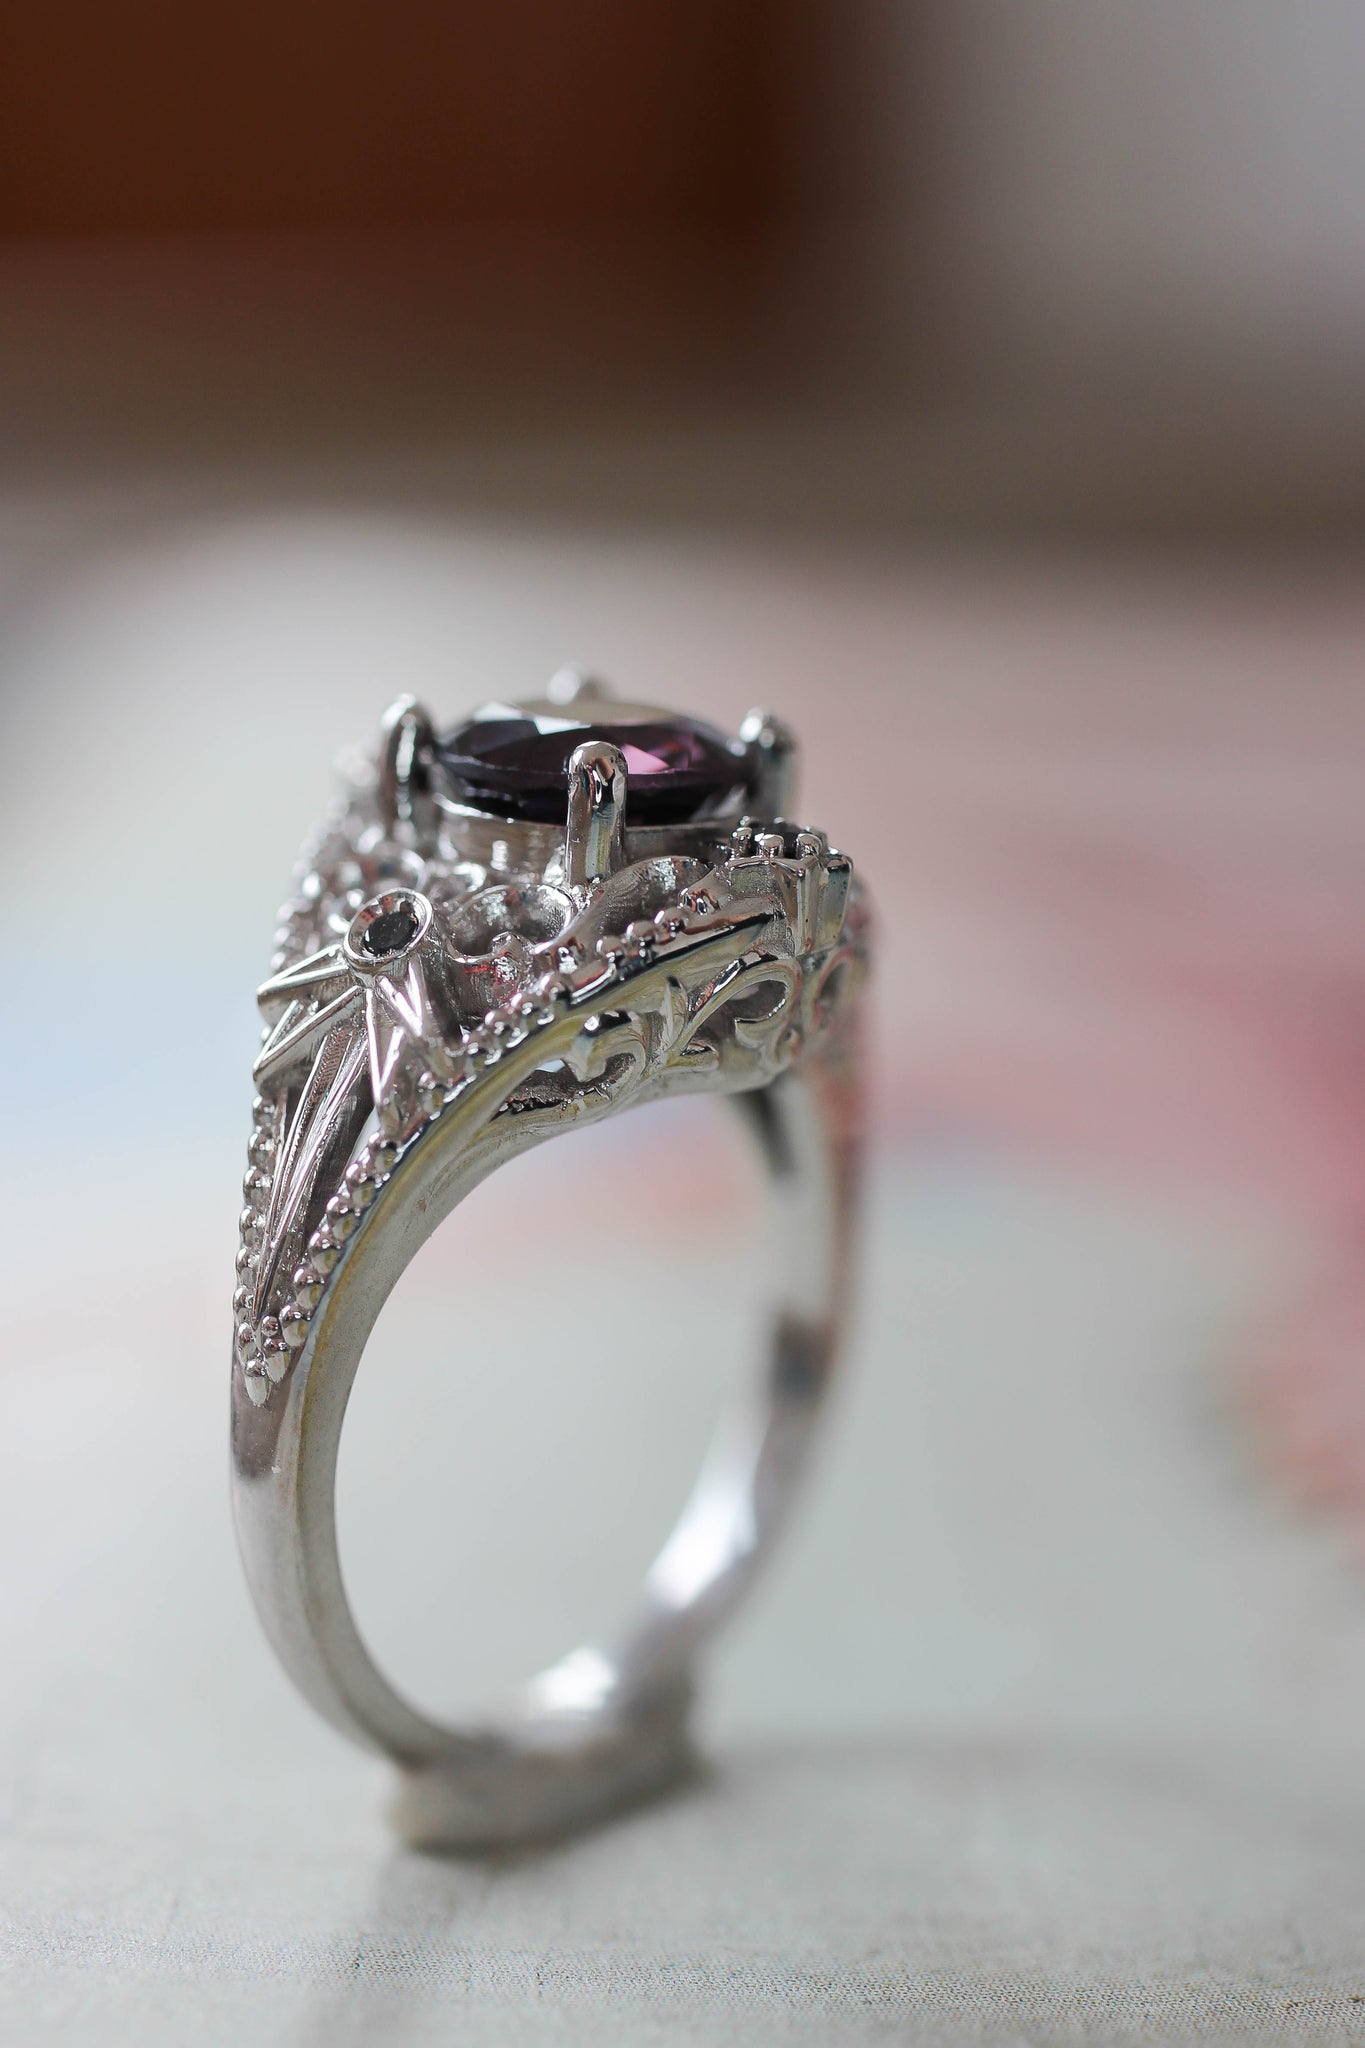 Purple spinel and black diamonds ring, stars engagement ring - Eden Garden Jewelry™